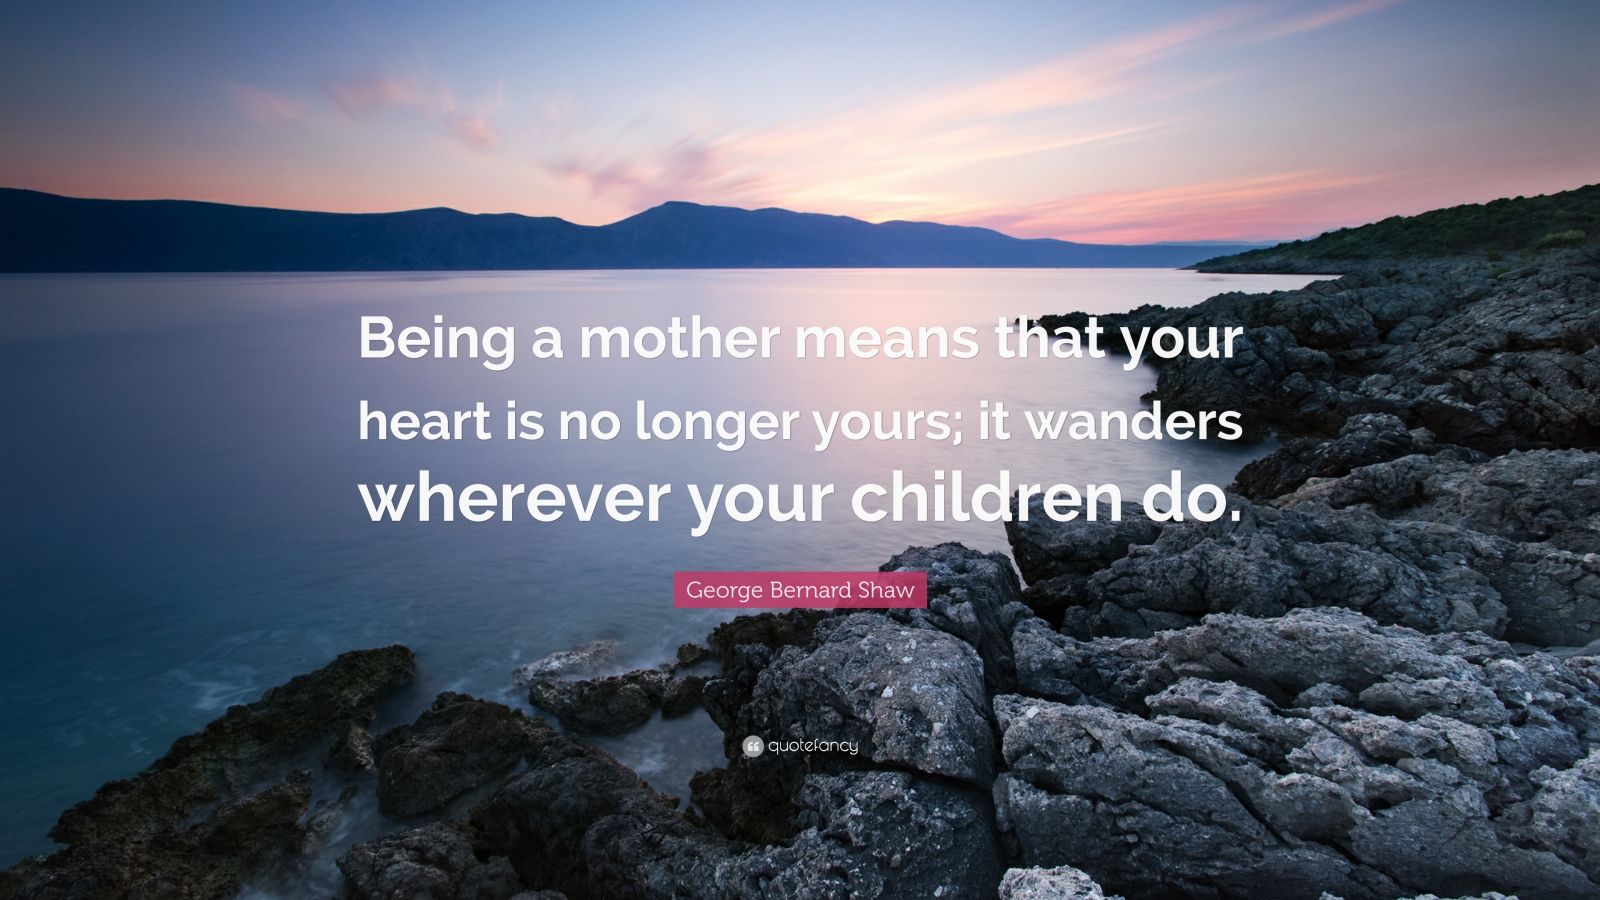 George Bernard Shaw Quote: “Being a mother means that your heart is no